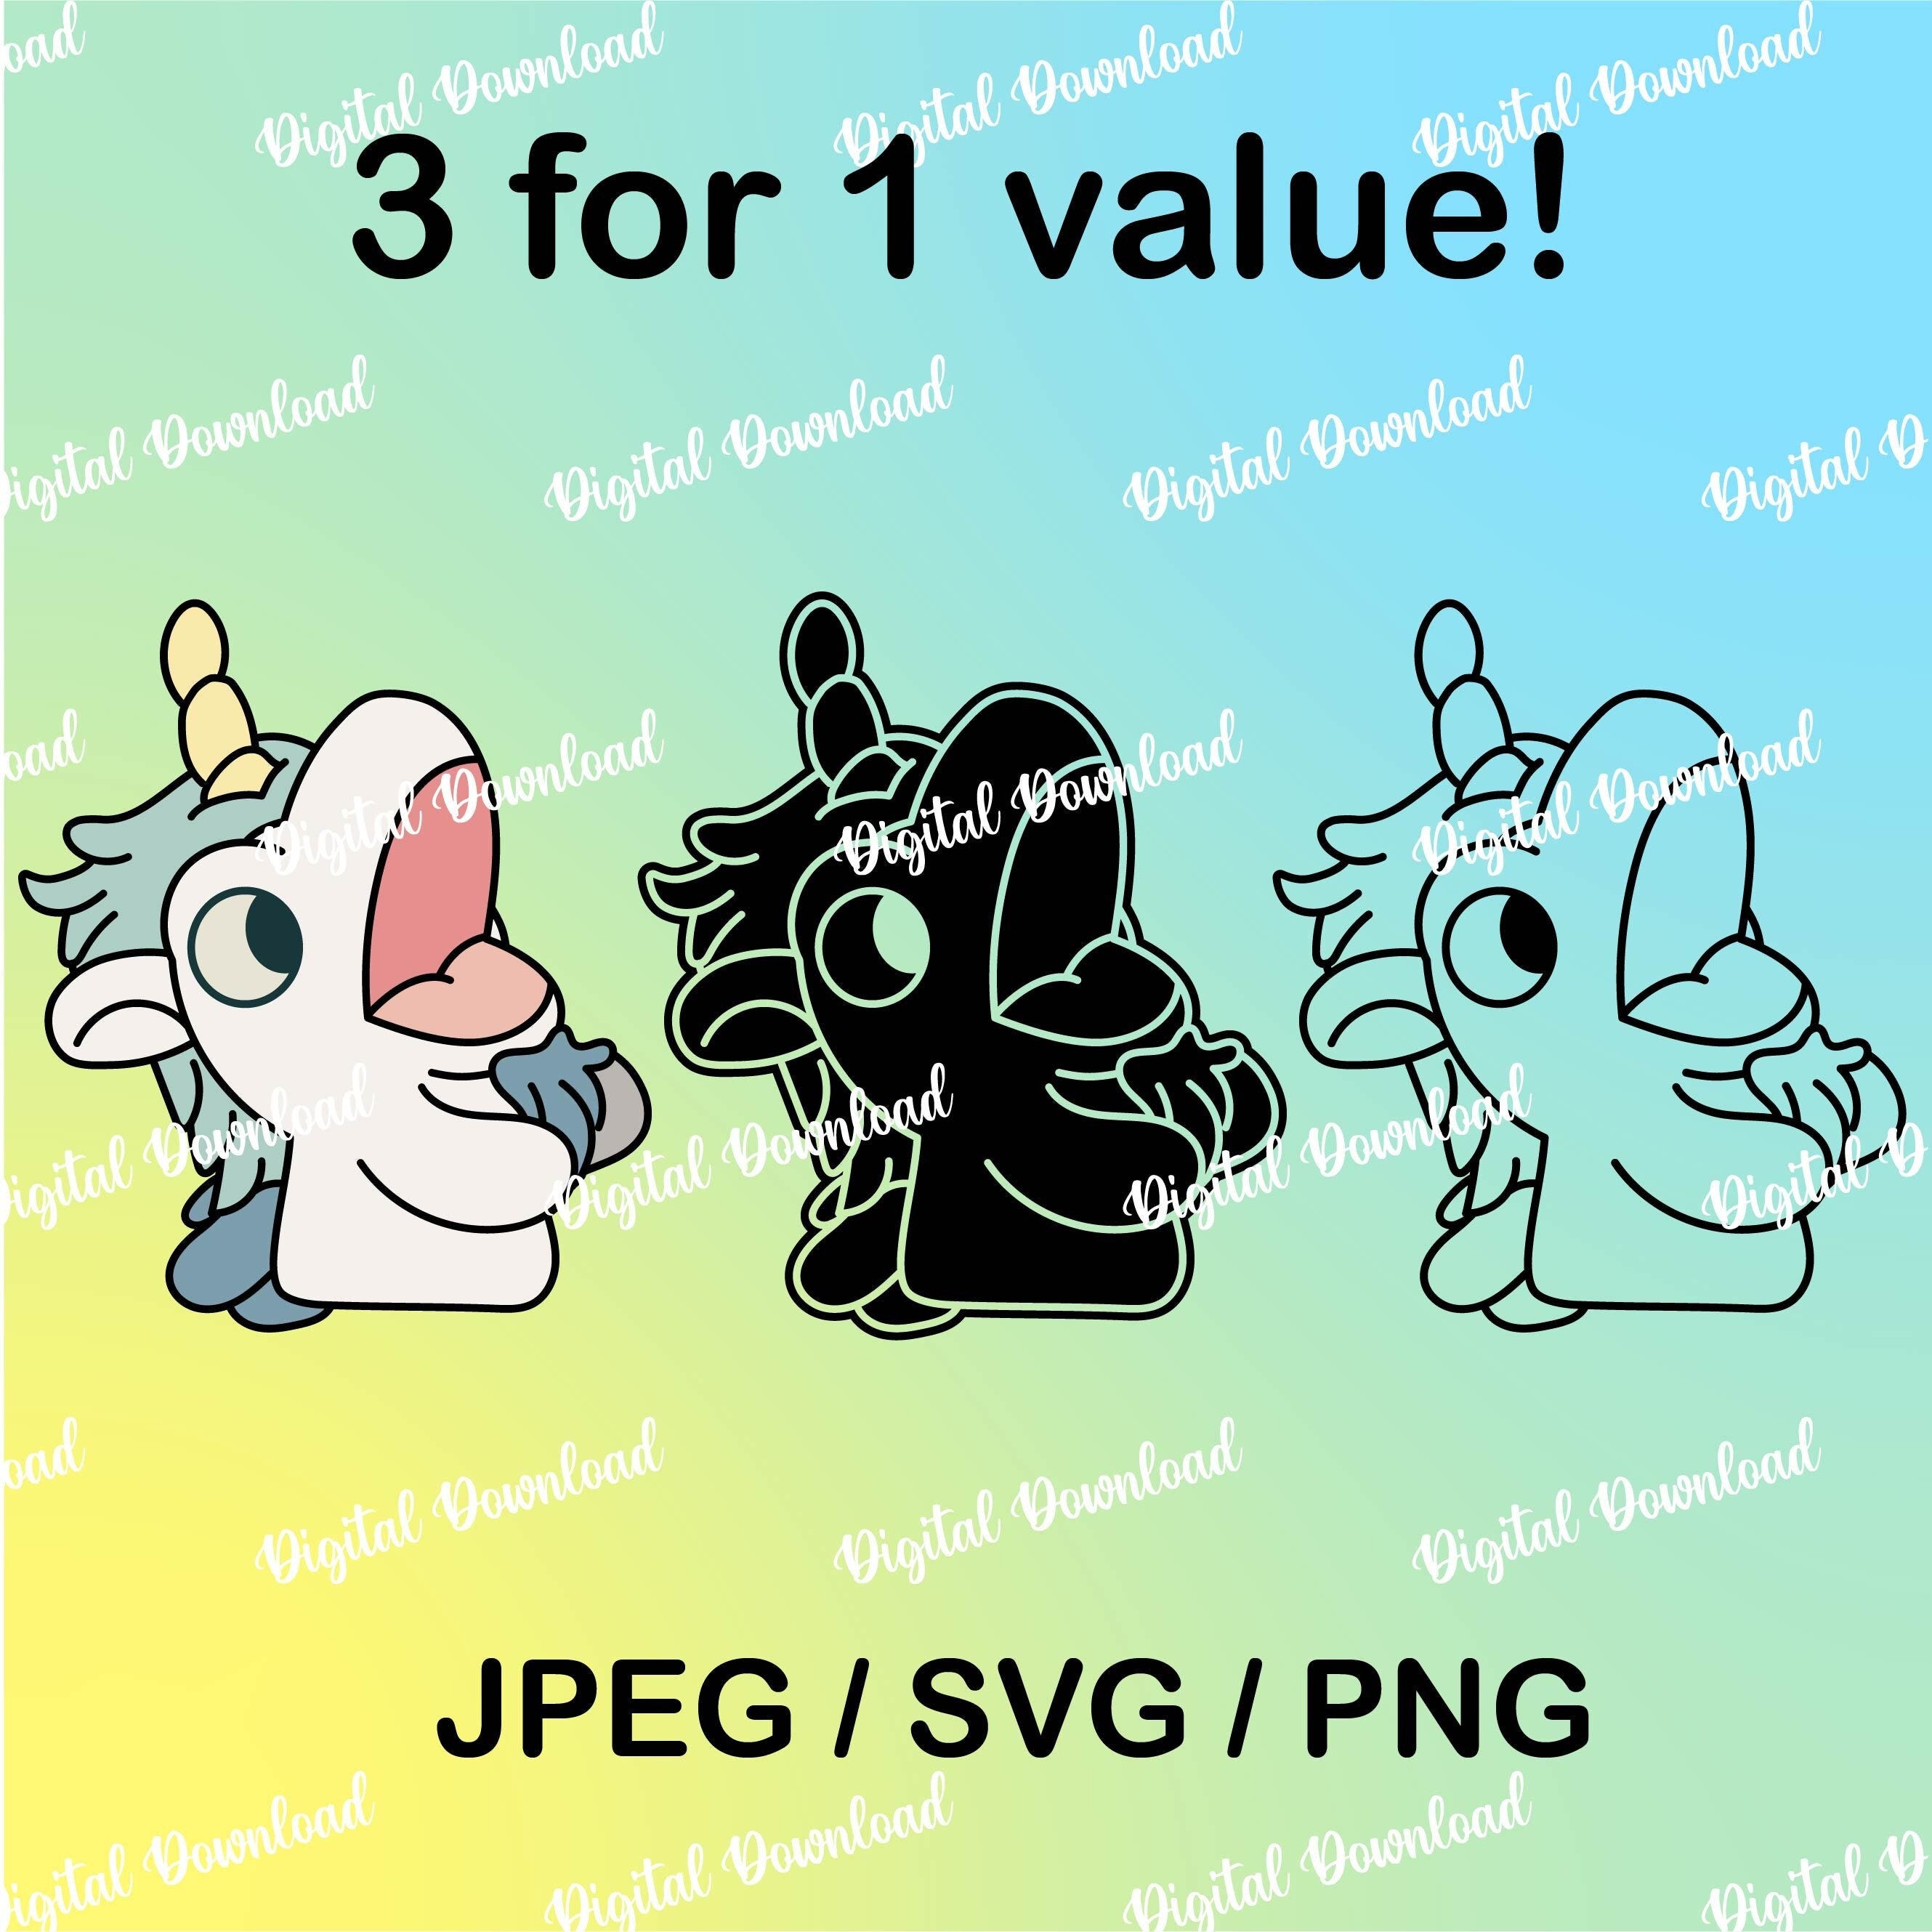 Unicorn horse SVG, JPEG and PNG digital download - layered file unicourse - 3 in one - Cricut, Silhouette Cameo, and all cutting machines